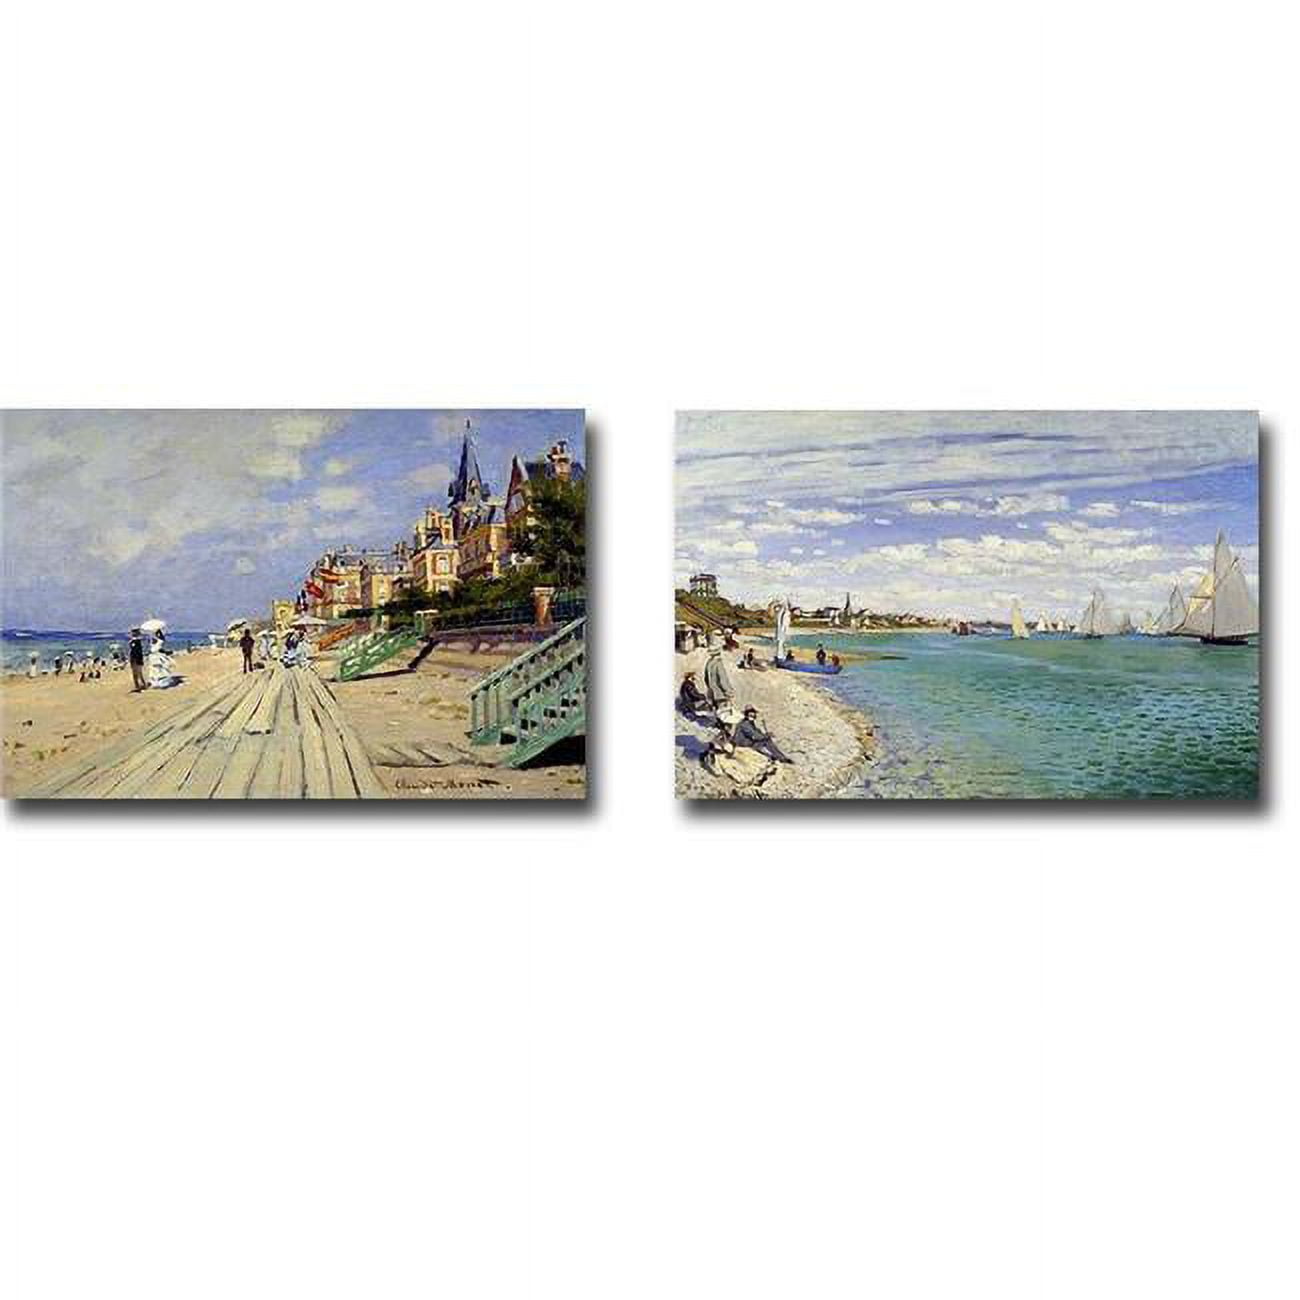 The Beach At Trouville & The Beach At Saint-adresse By Claude Monet 2-piece Premium Gallery-wrapped Canvas Giclee Art Set - 12 X 18 X 1.5 In.